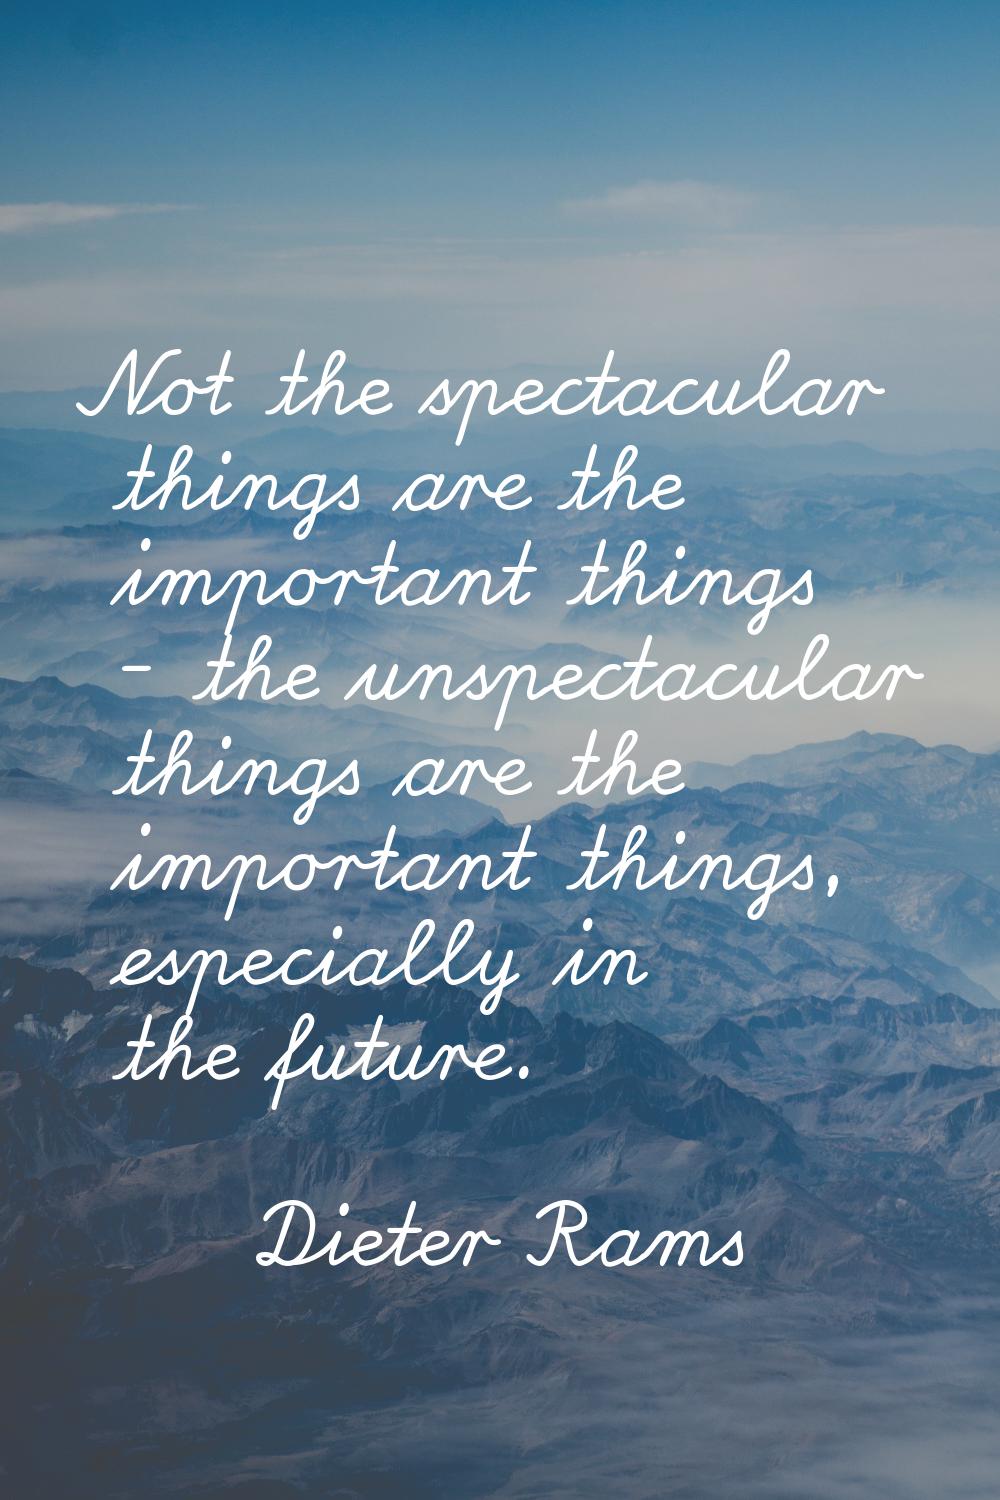 Not the spectacular things are the important things - the unspectacular things are the important th